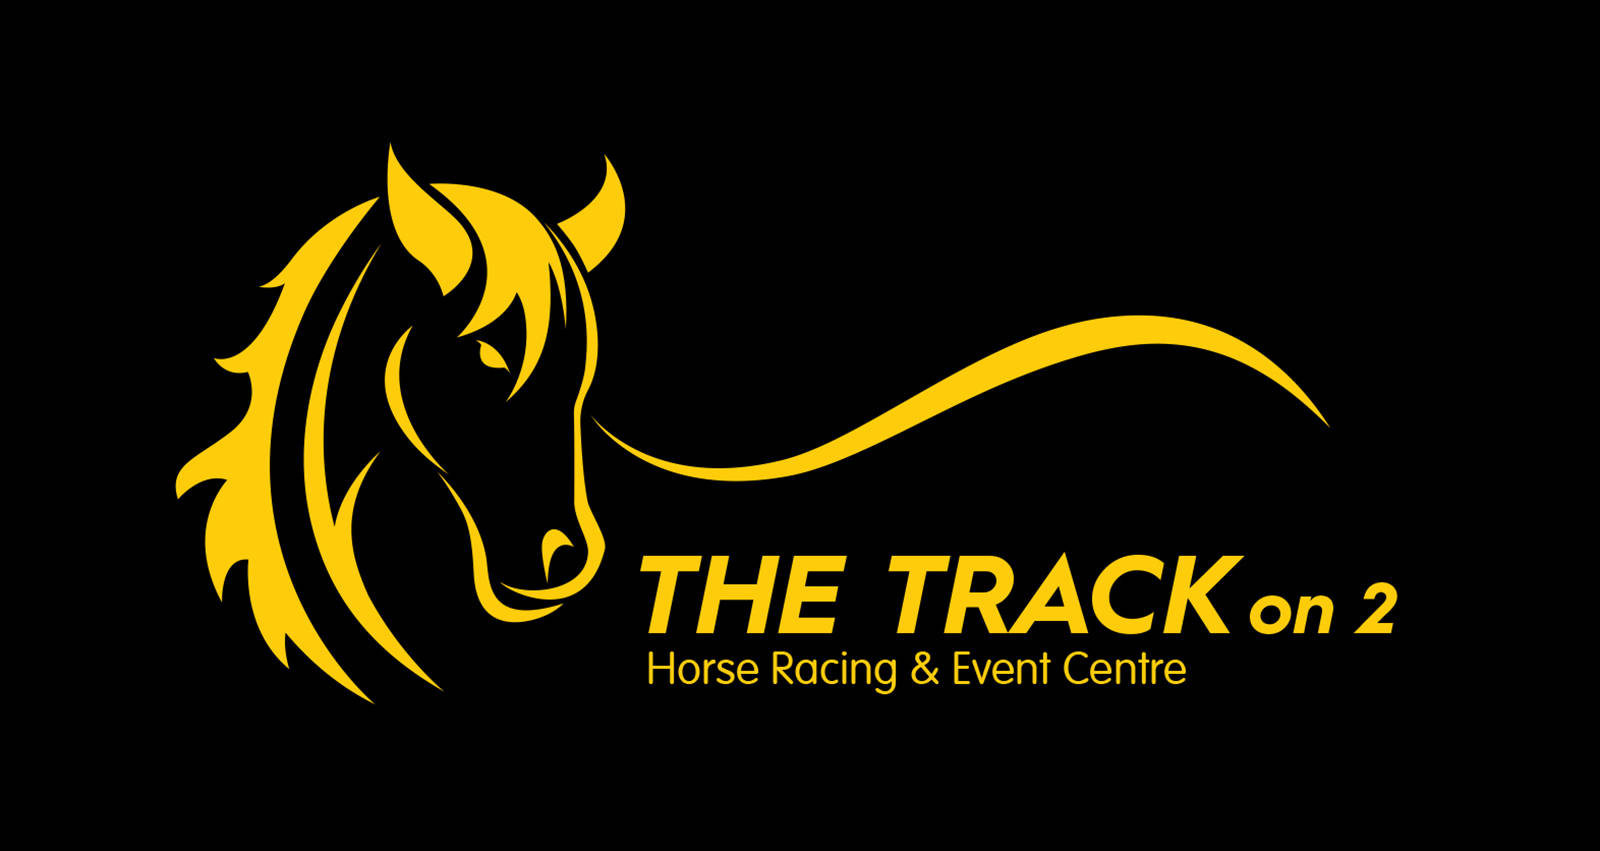 Exhibition horse races planned this month for local track